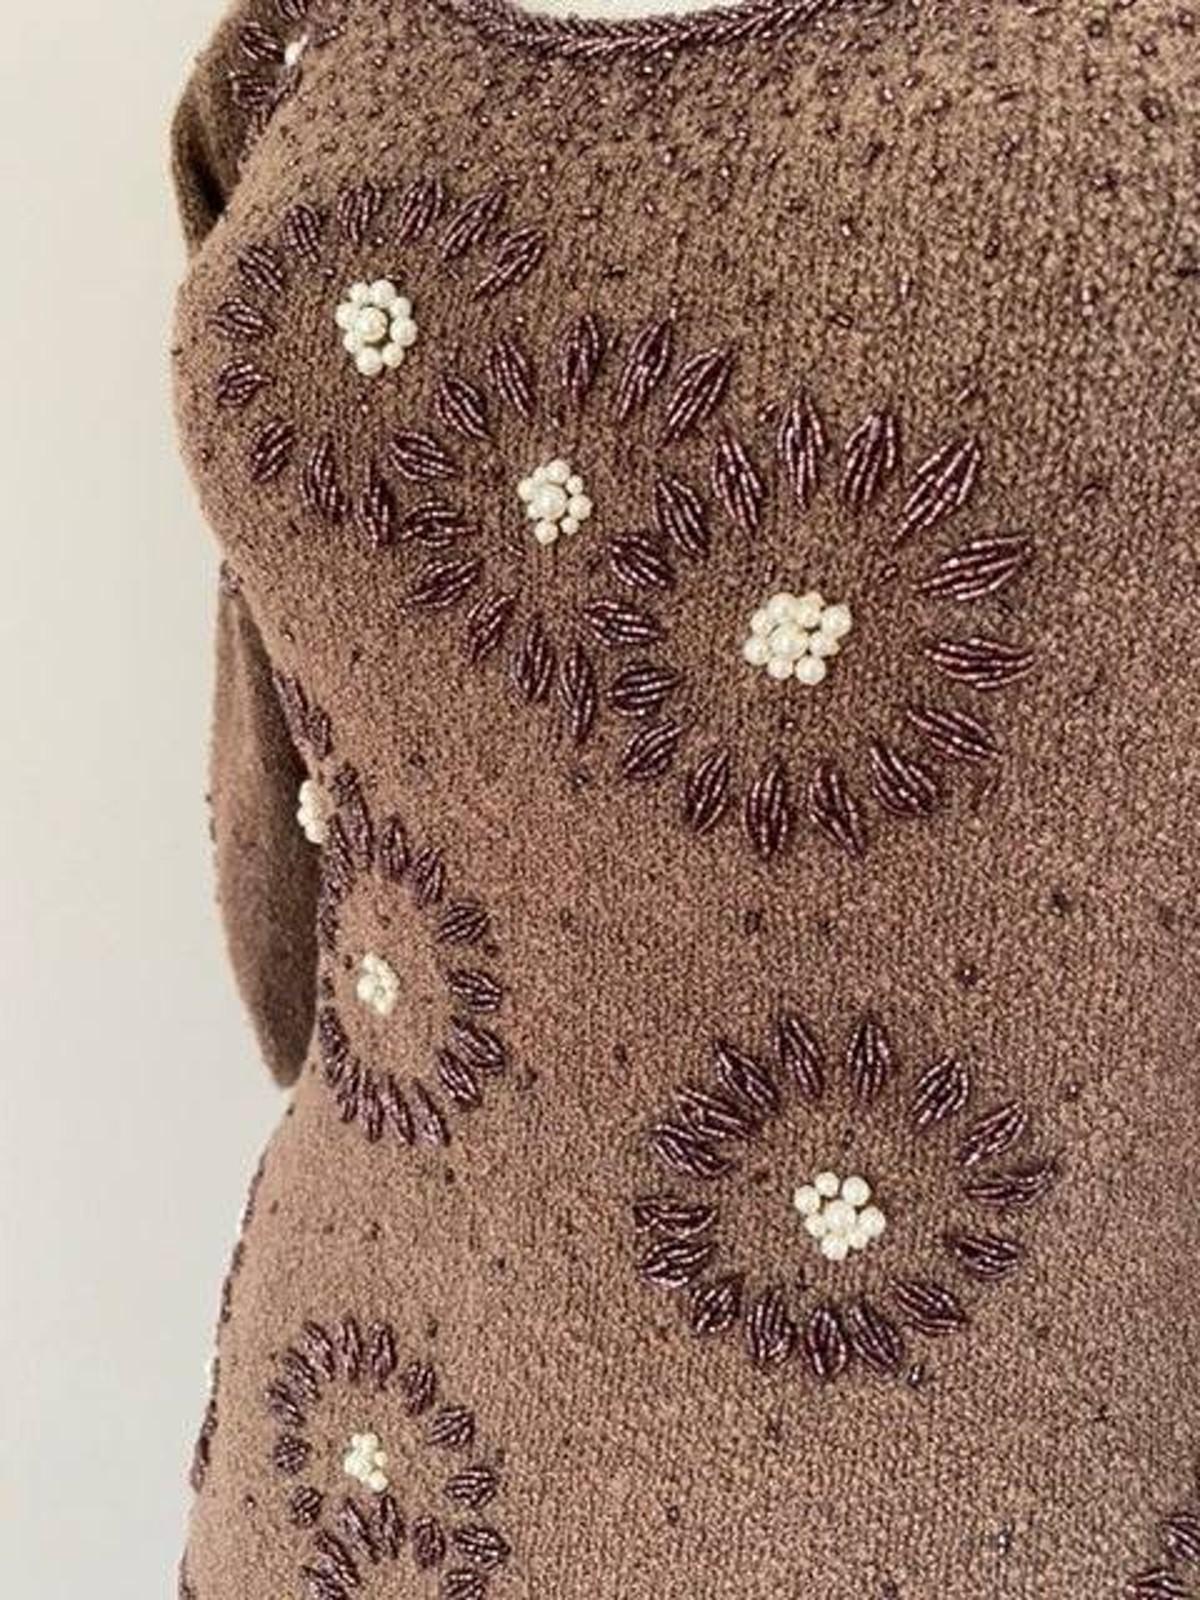 Gene Shelly 1960s evening dress in mocha bouclé accented with metallic wine-colored seed beads and faux pearls! The seed beads form a jeweled collar and graduate out to dots of beads throughout the dress. In addition, the beads and pearls come